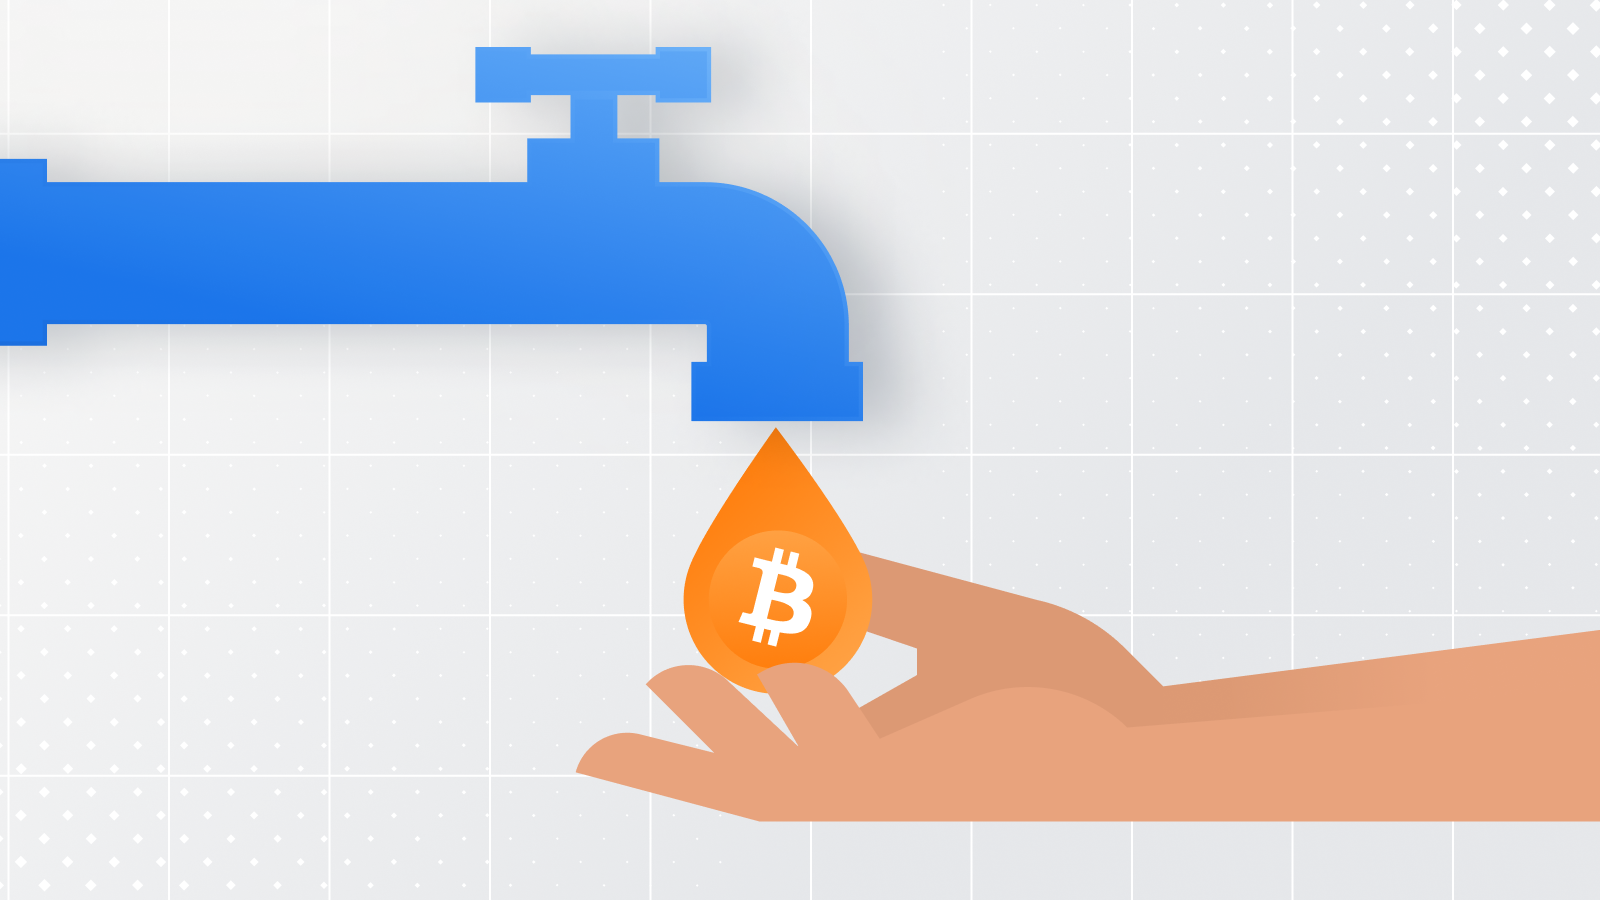 Crypto Market Pool - Create a crypto faucet using a Solidity smart contract